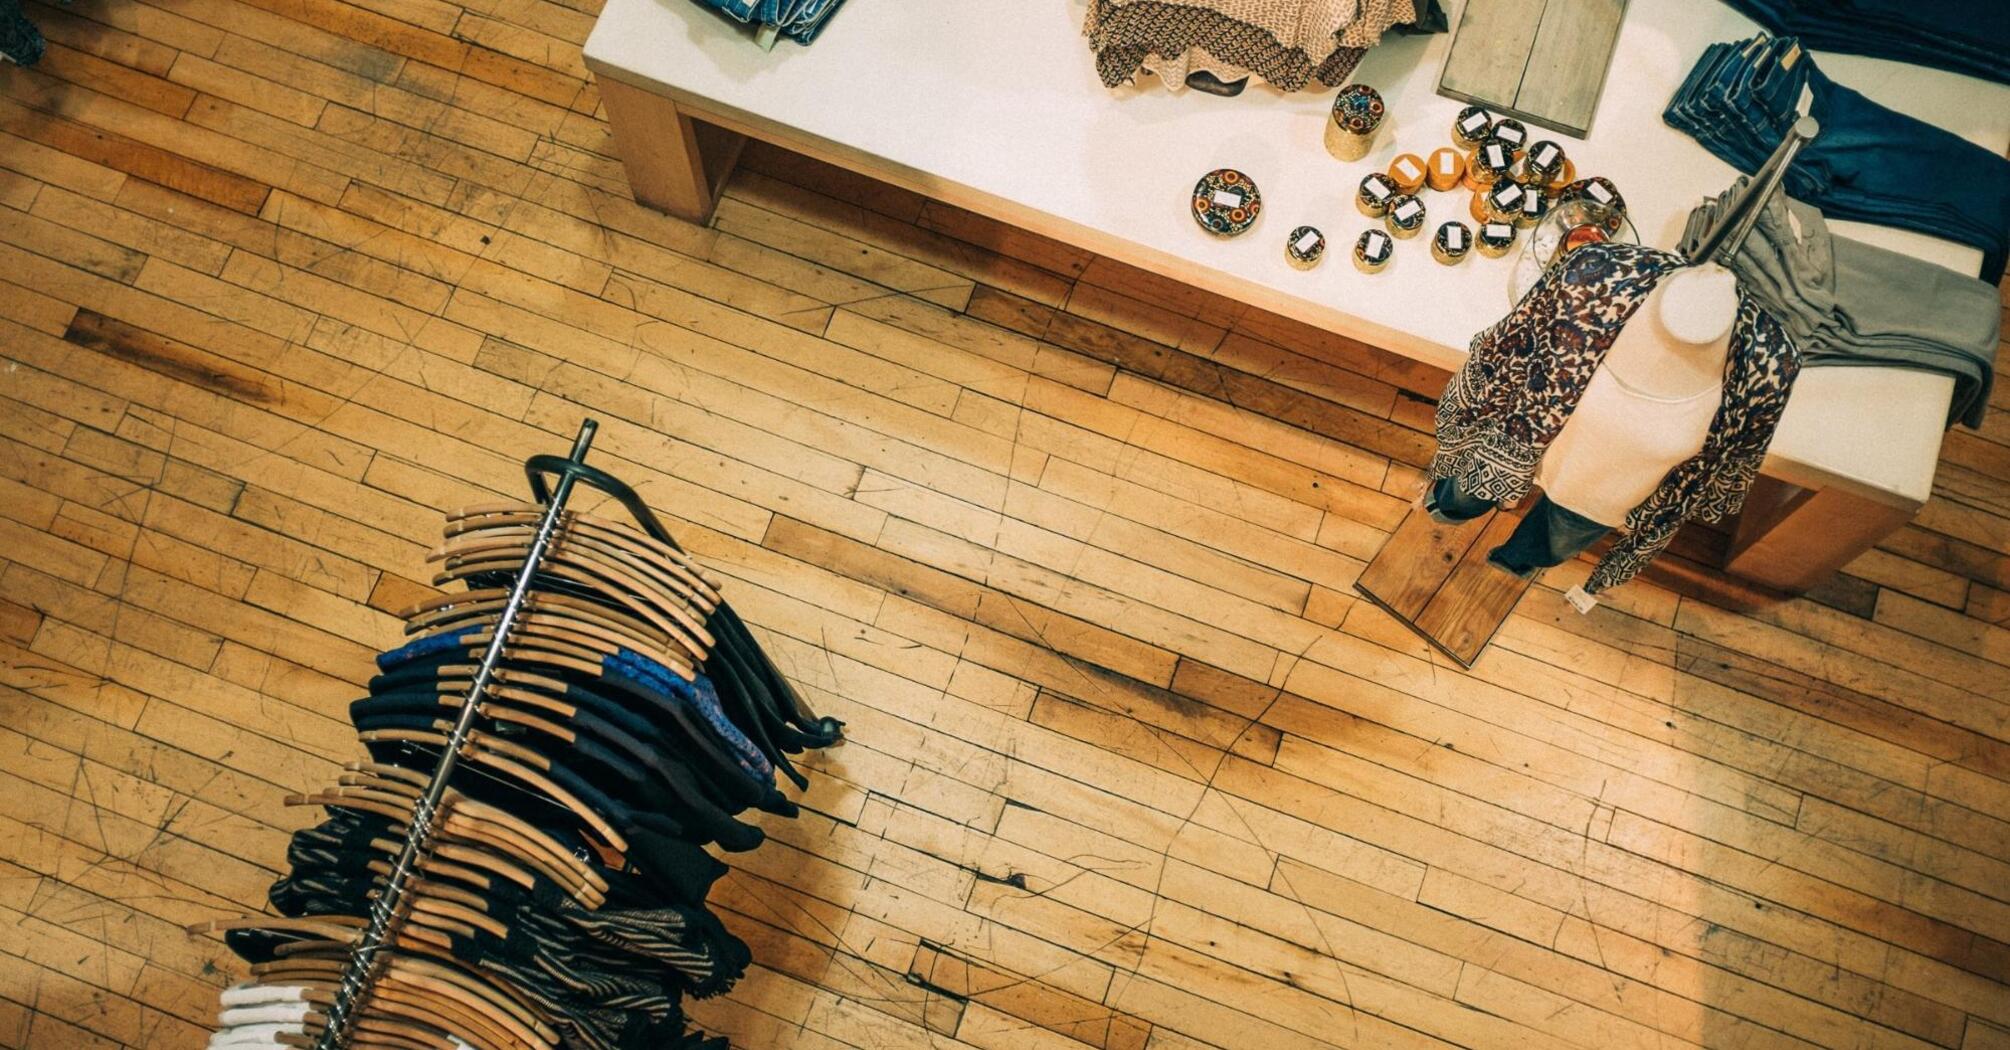 Aerial view of a boutique with clothes displayed on racks and a table